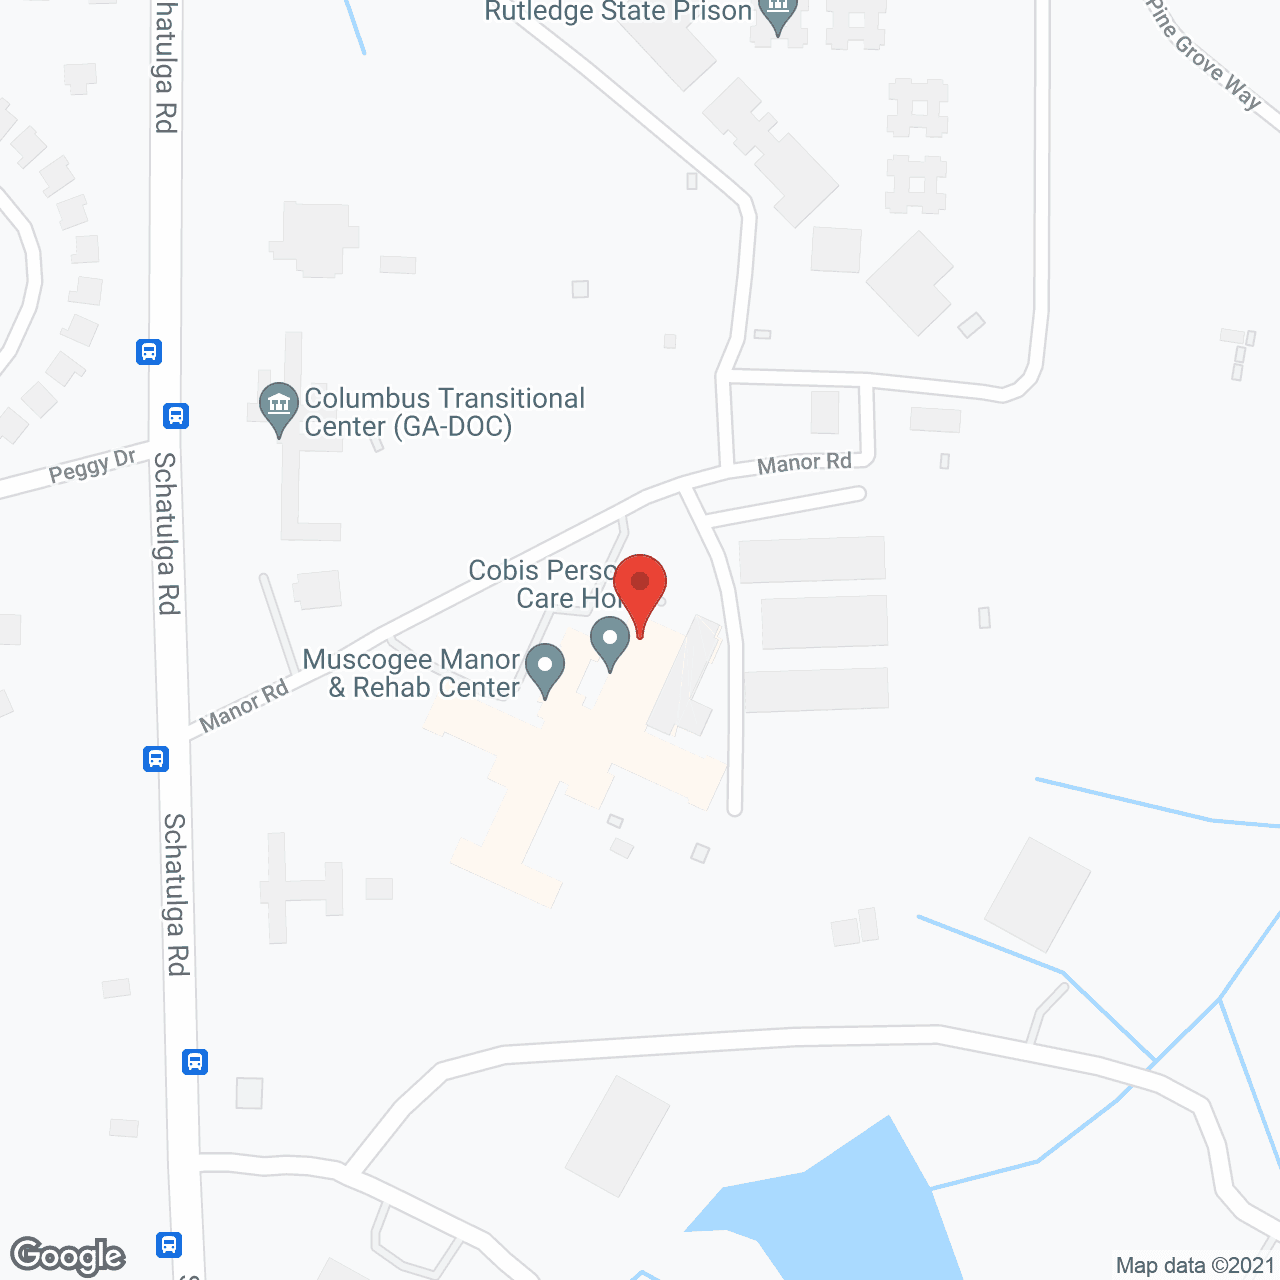 Cobis Personal Care Home in google map